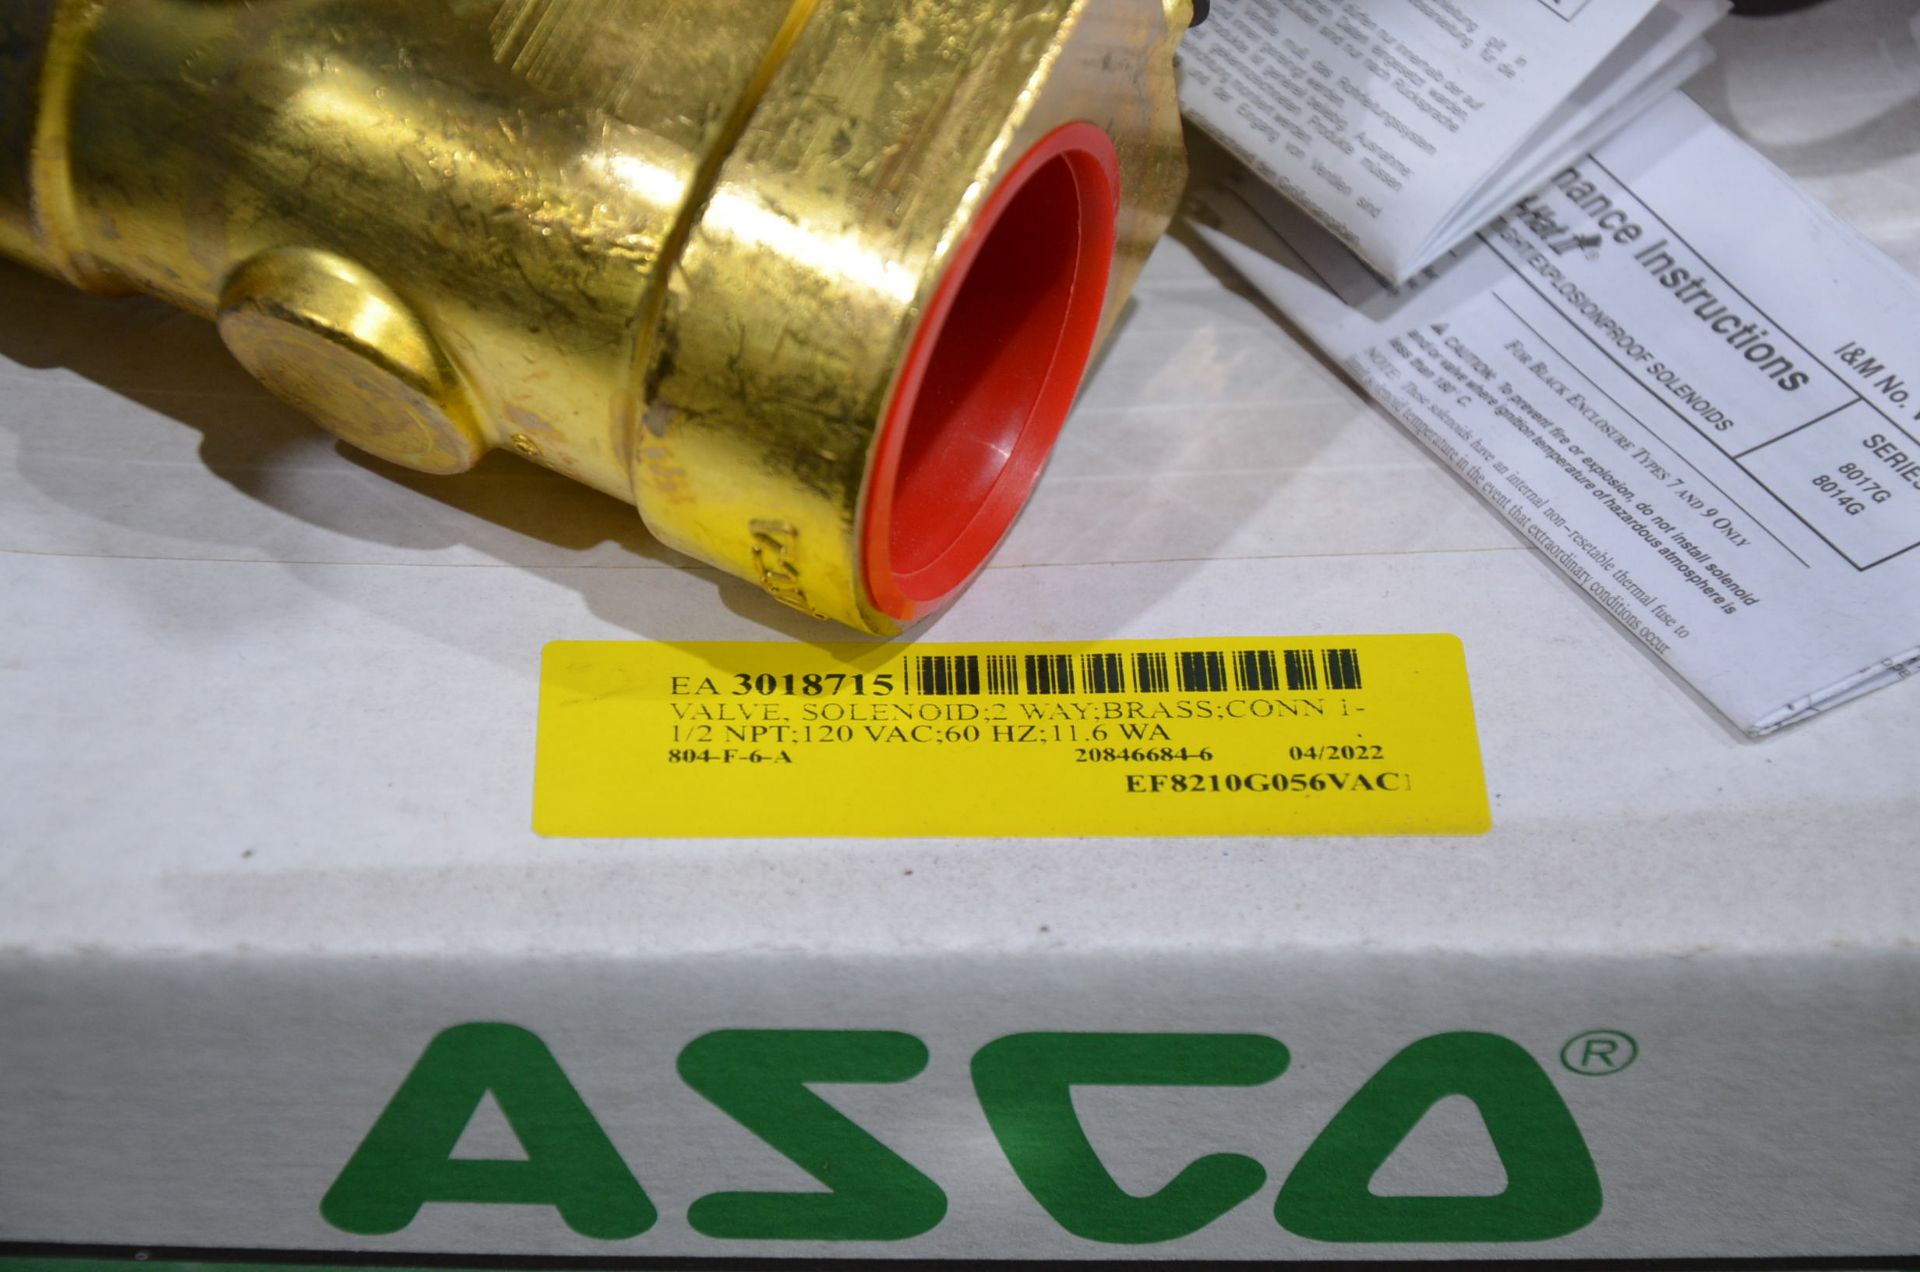 LOT/ CONTENTS OF SHELF - ASCO 2-WAY BRASS SOLENOID SWITCHES, (2) EMERSON SOLA CVS 23-23-220-8 - Image 3 of 8